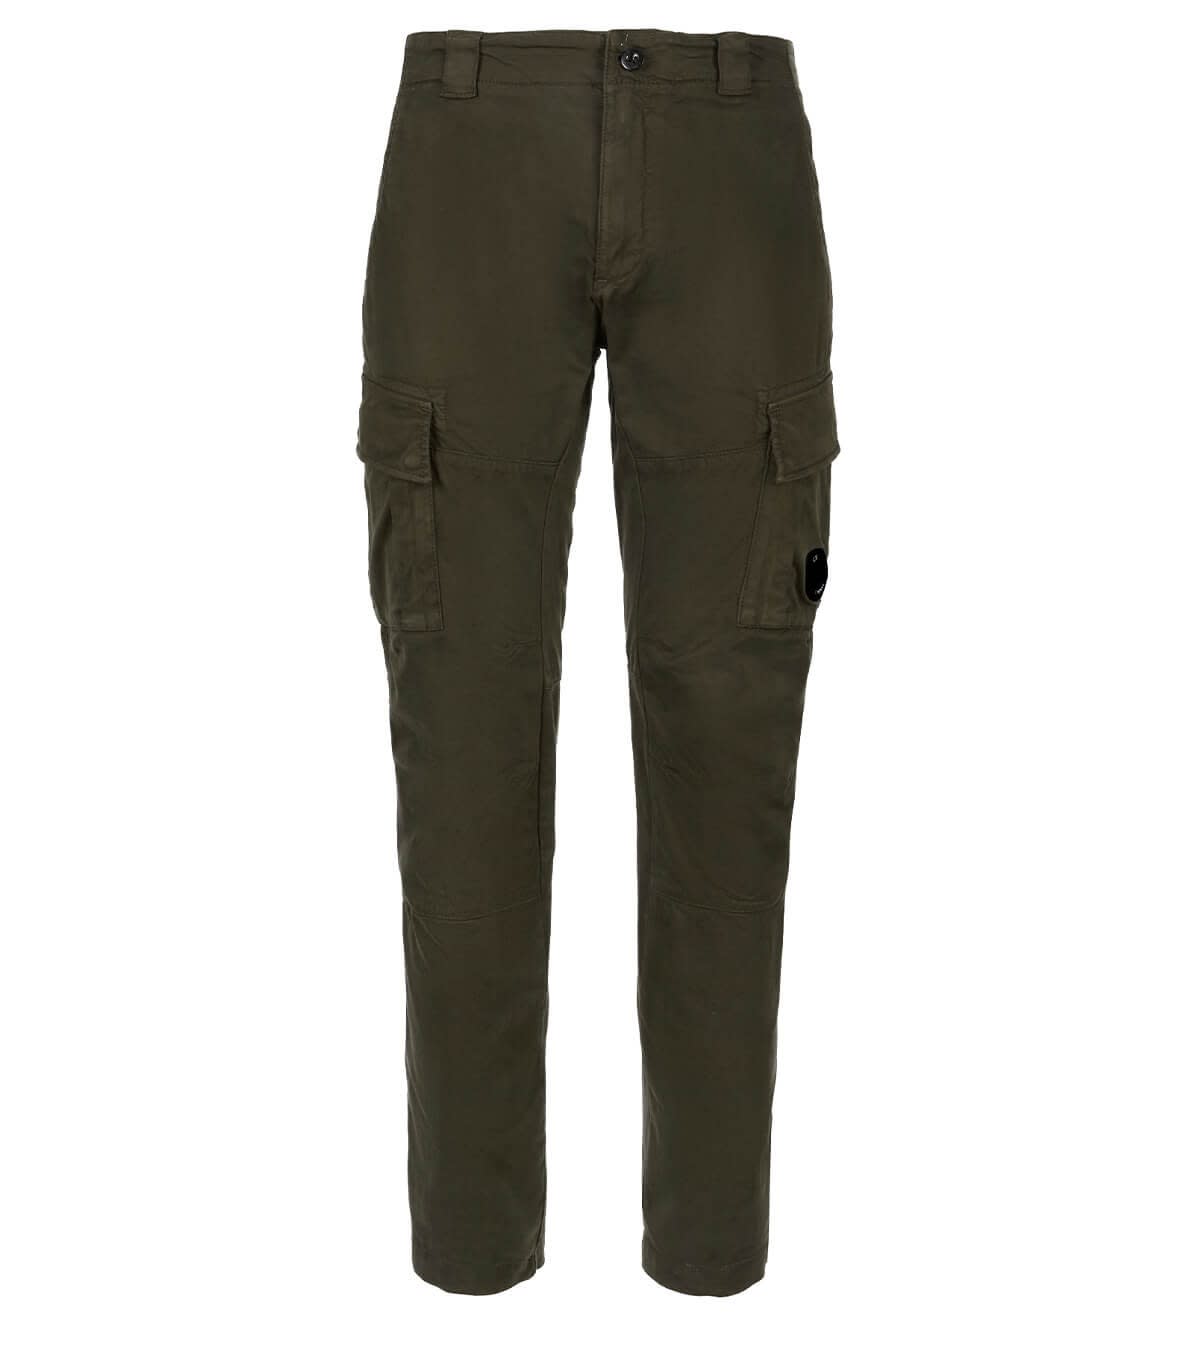 C.P. COMPANY C.P. COMPANY SATEEN STRETCH MILITARY GREEN CARGO TROUSERS